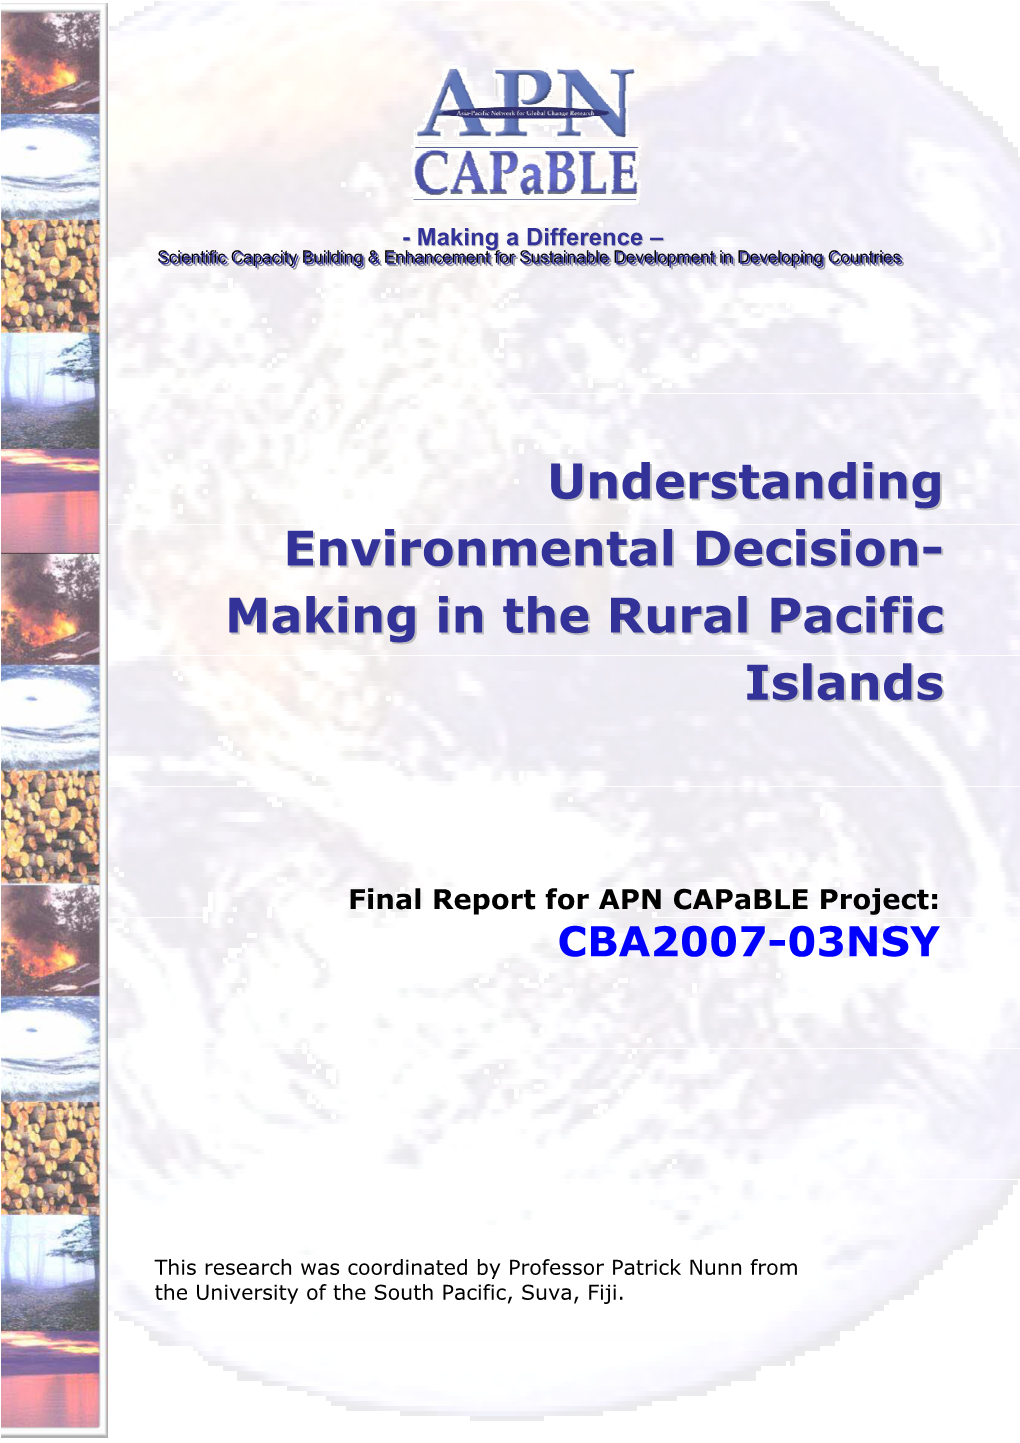 Understanding Environmental Decision- Making in the Rural Pacific Islands